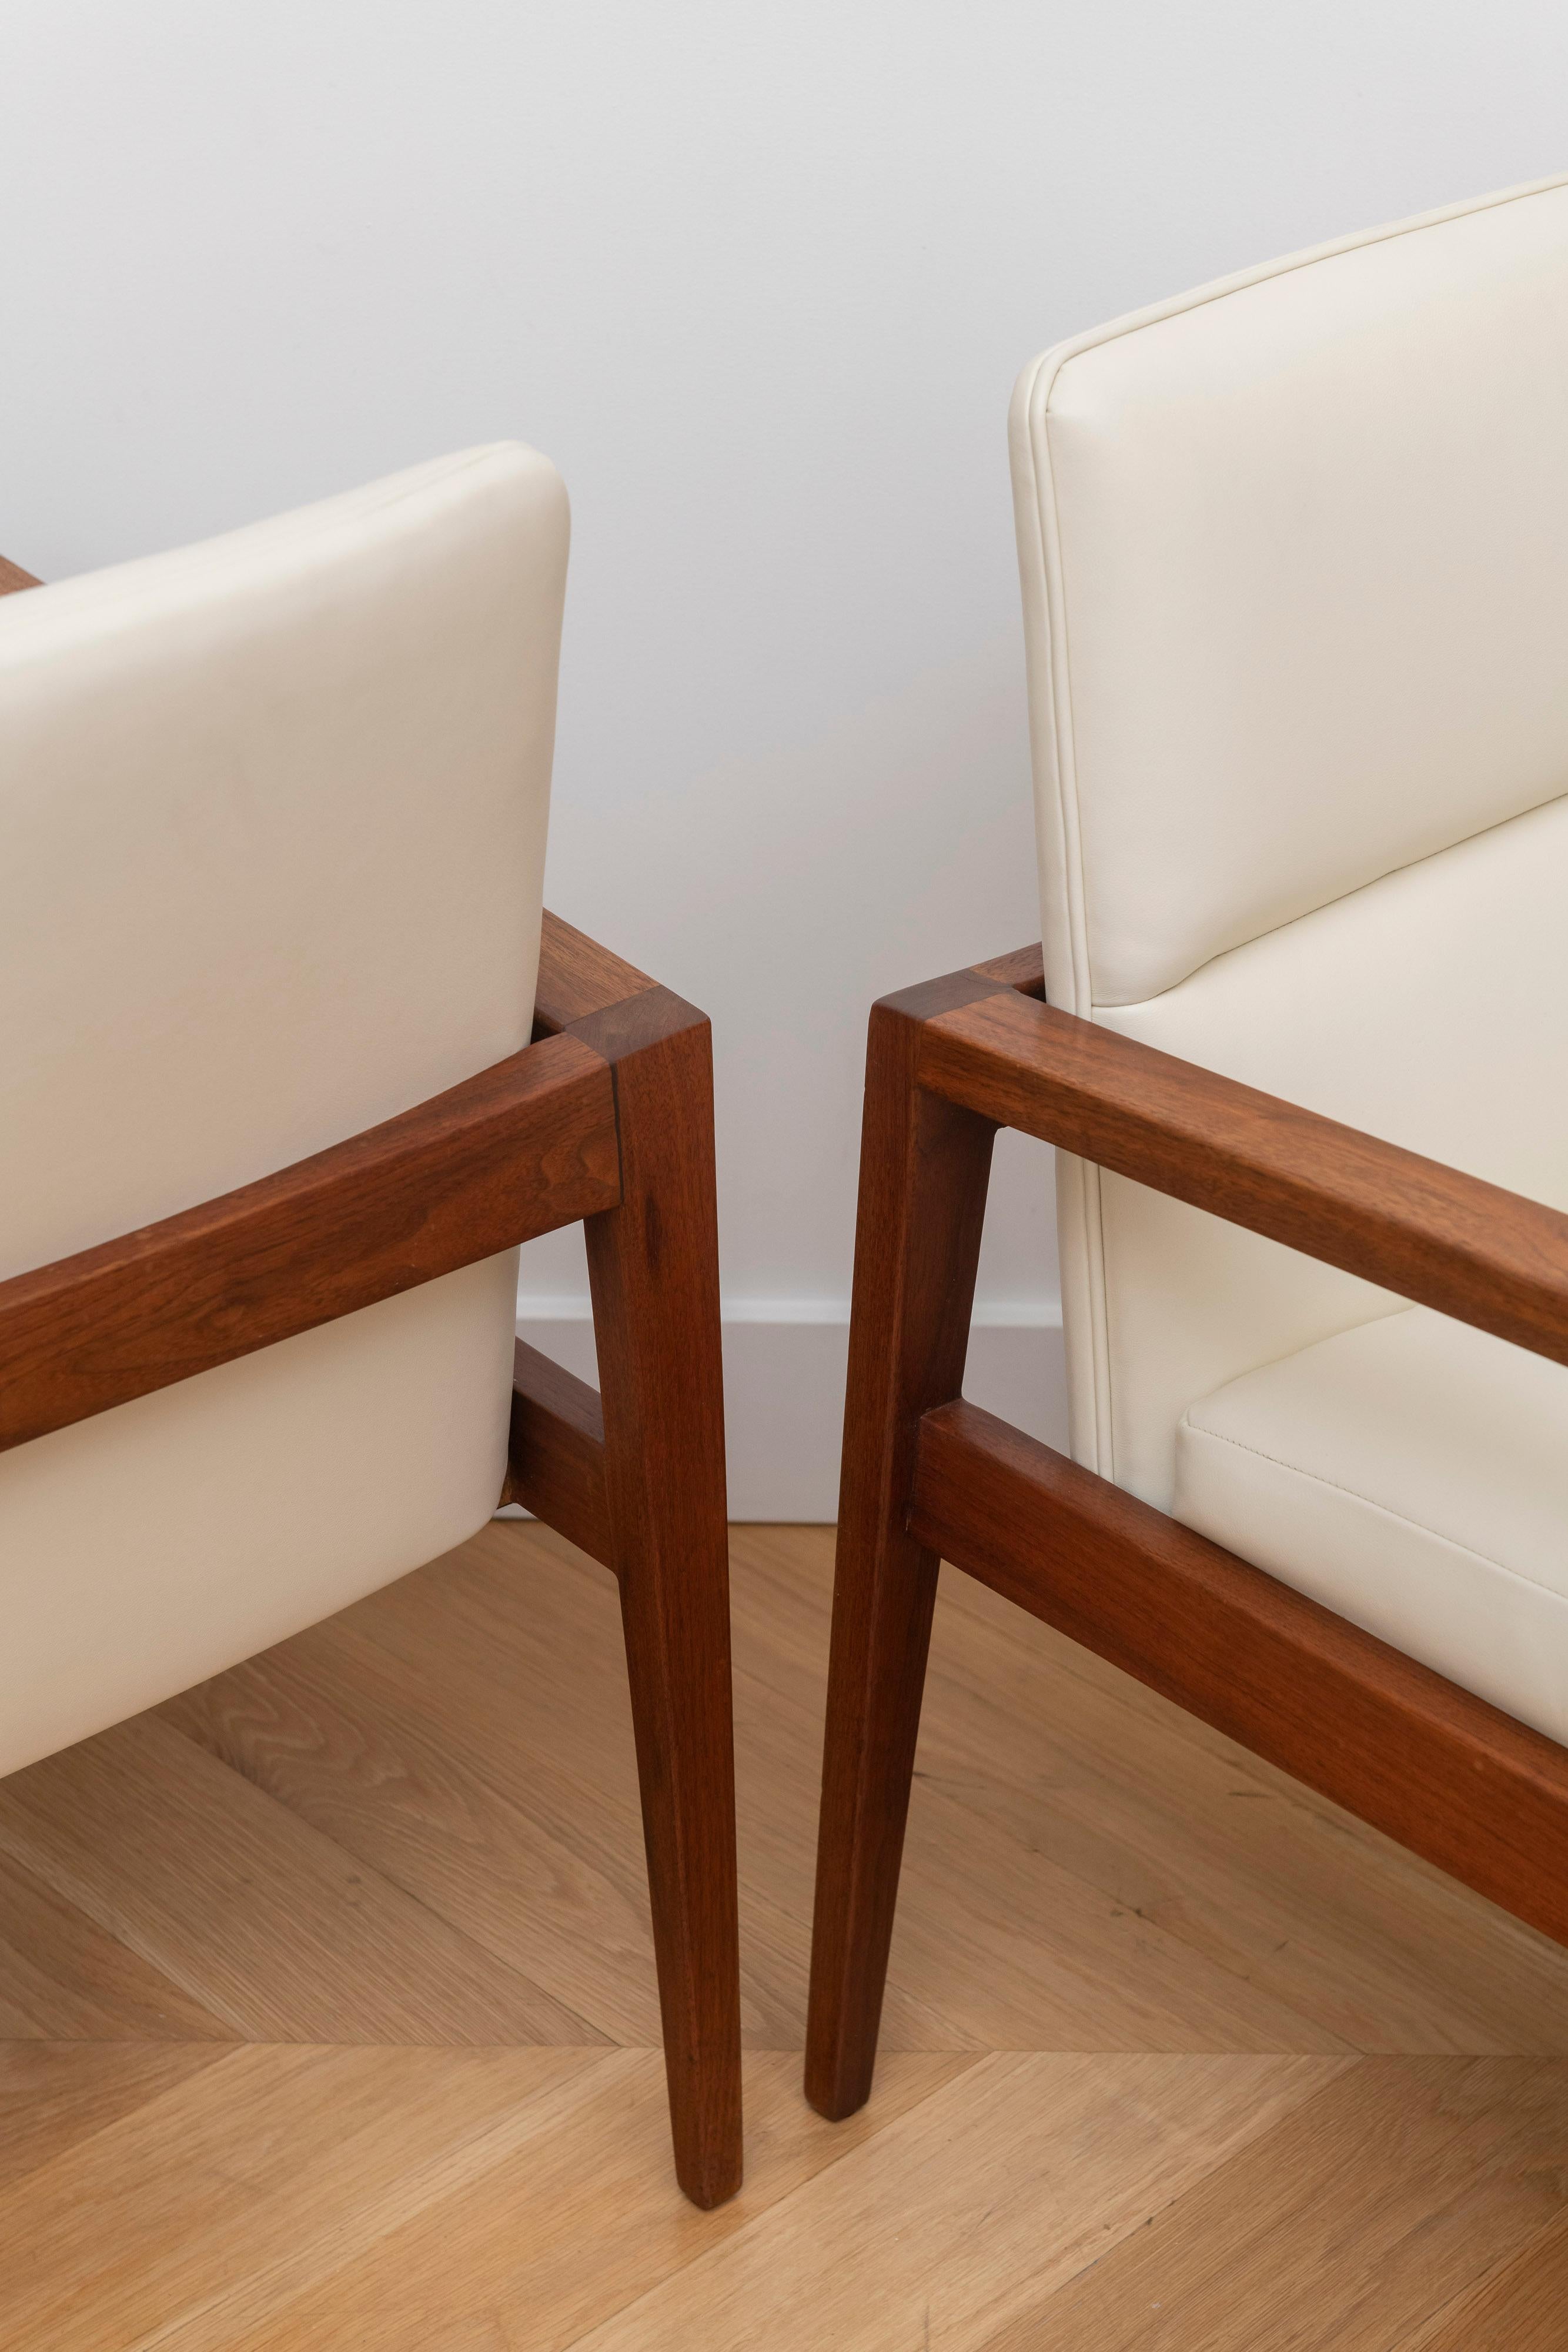 Jens Risom Midcentury Walnut & Cream Occasional Chairs In Excellent Condition For Sale In San Francisco, CA